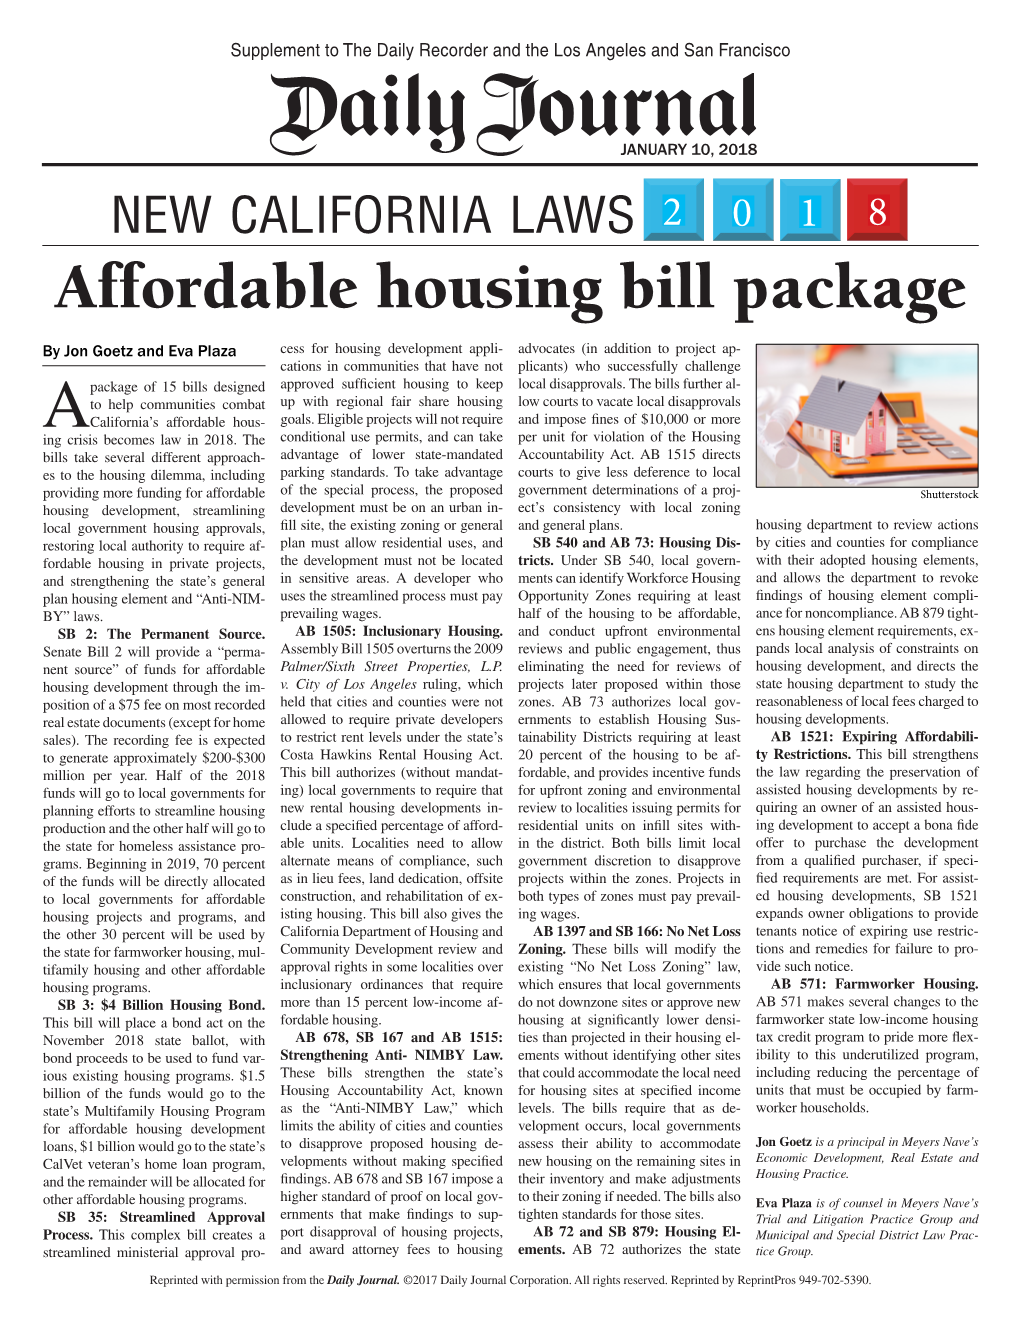 New California Laws: Affordable Housing Bill Package